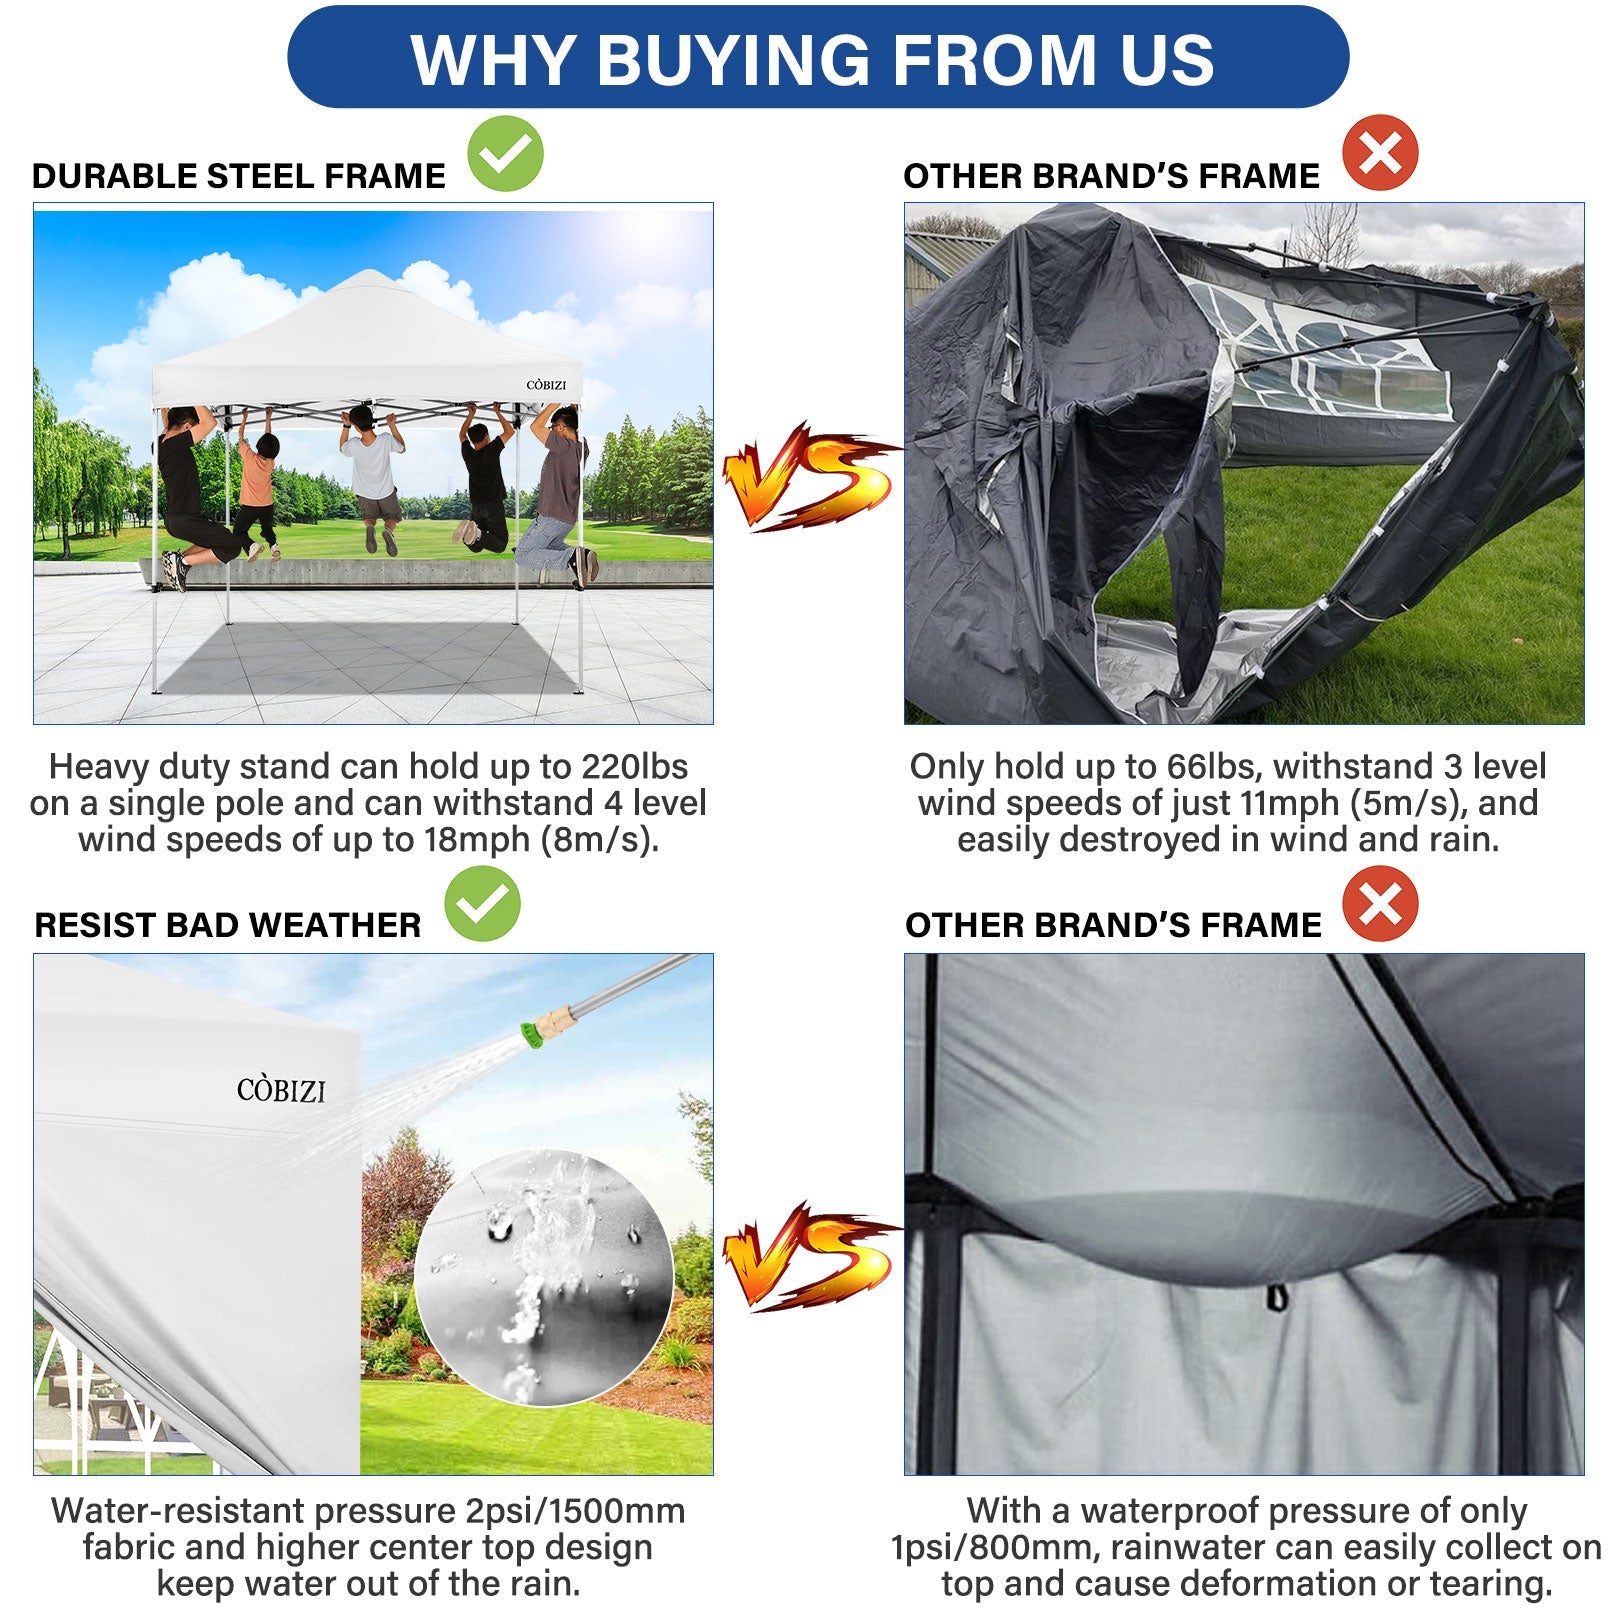 10 x 10ft Pop Up Canopy Tent Instant Outdoor Party Heavy Duty Canopy Straight Leg Commercial Gazebo Tent Shelter with 4 Removable Sidewalls, 4 Sand Bags, Roller Bag, White